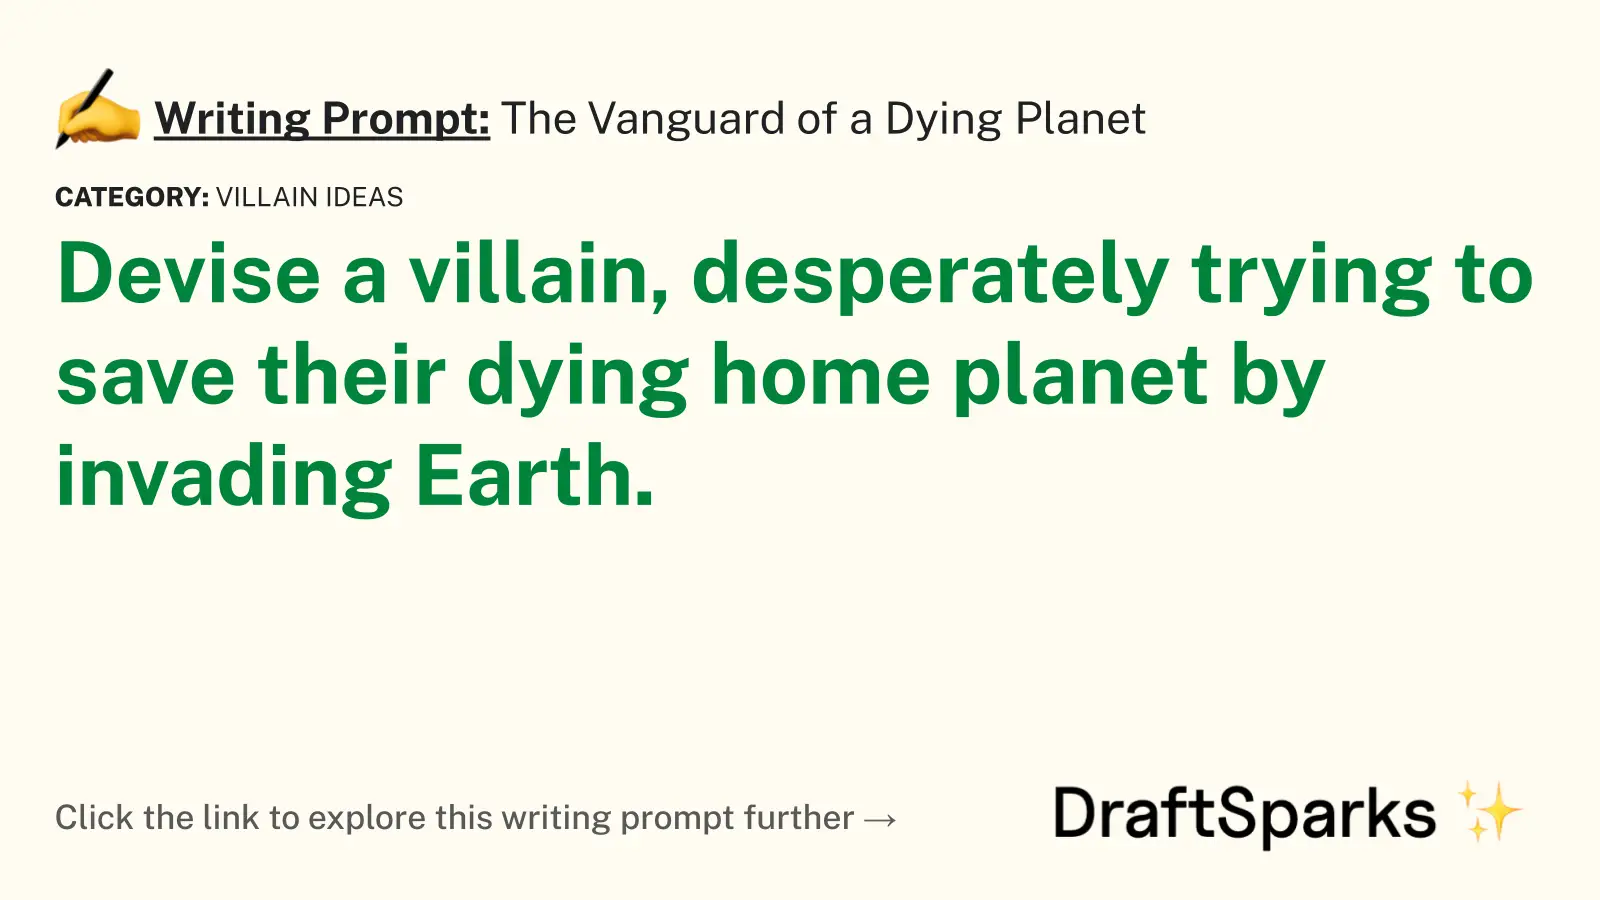 The Vanguard of a Dying Planet